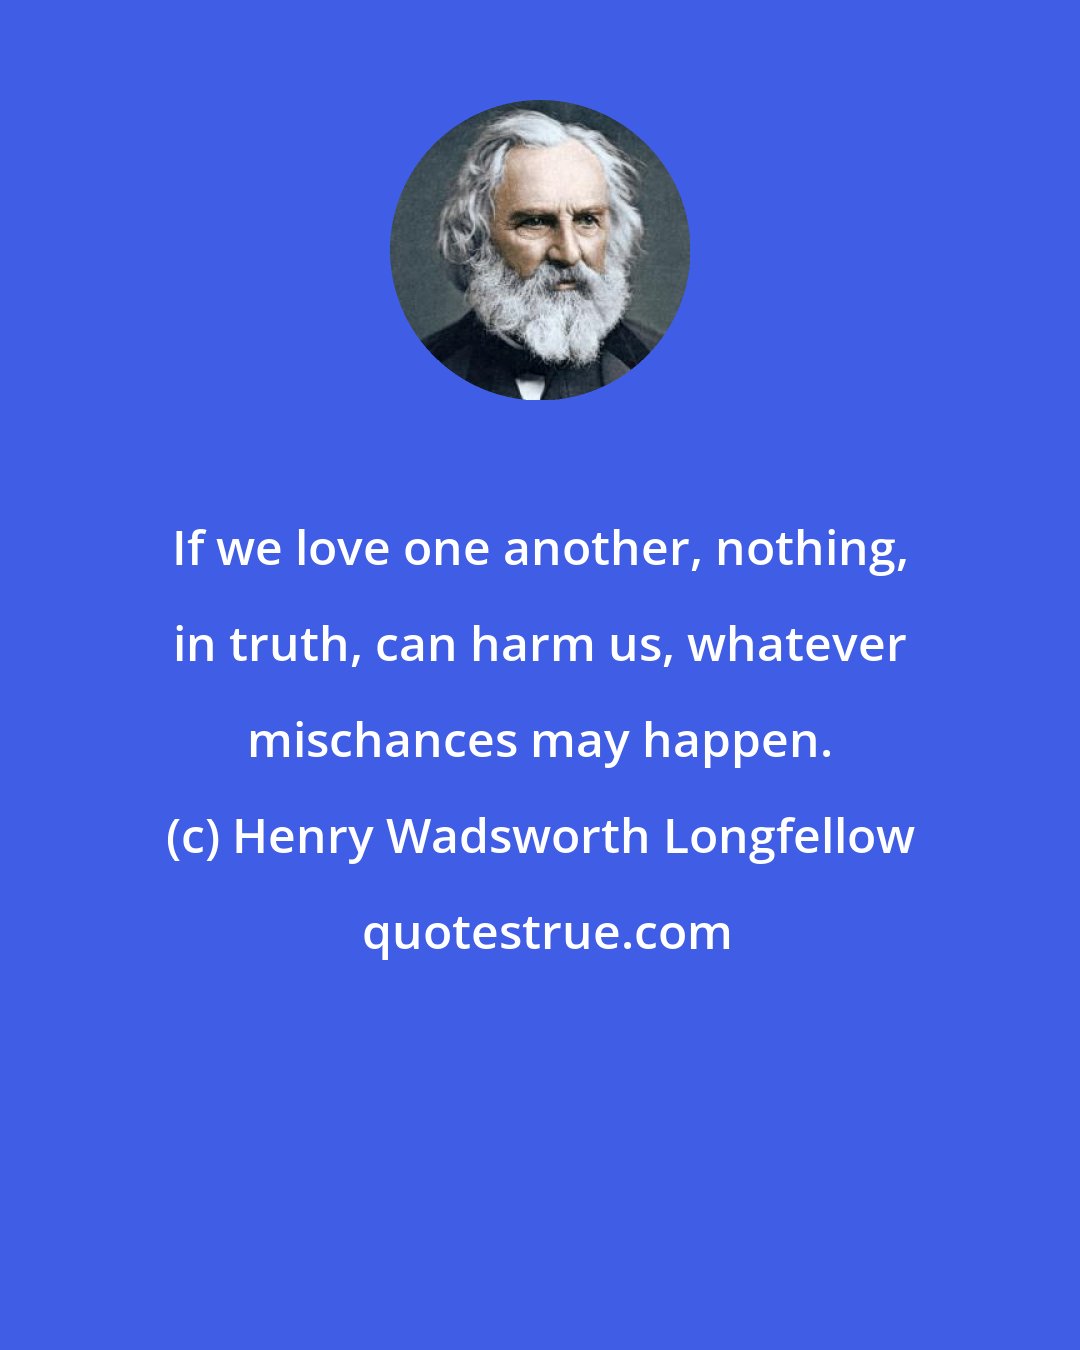 Henry Wadsworth Longfellow: If we love one another, nothing, in truth, can harm us, whatever mischances may happen.